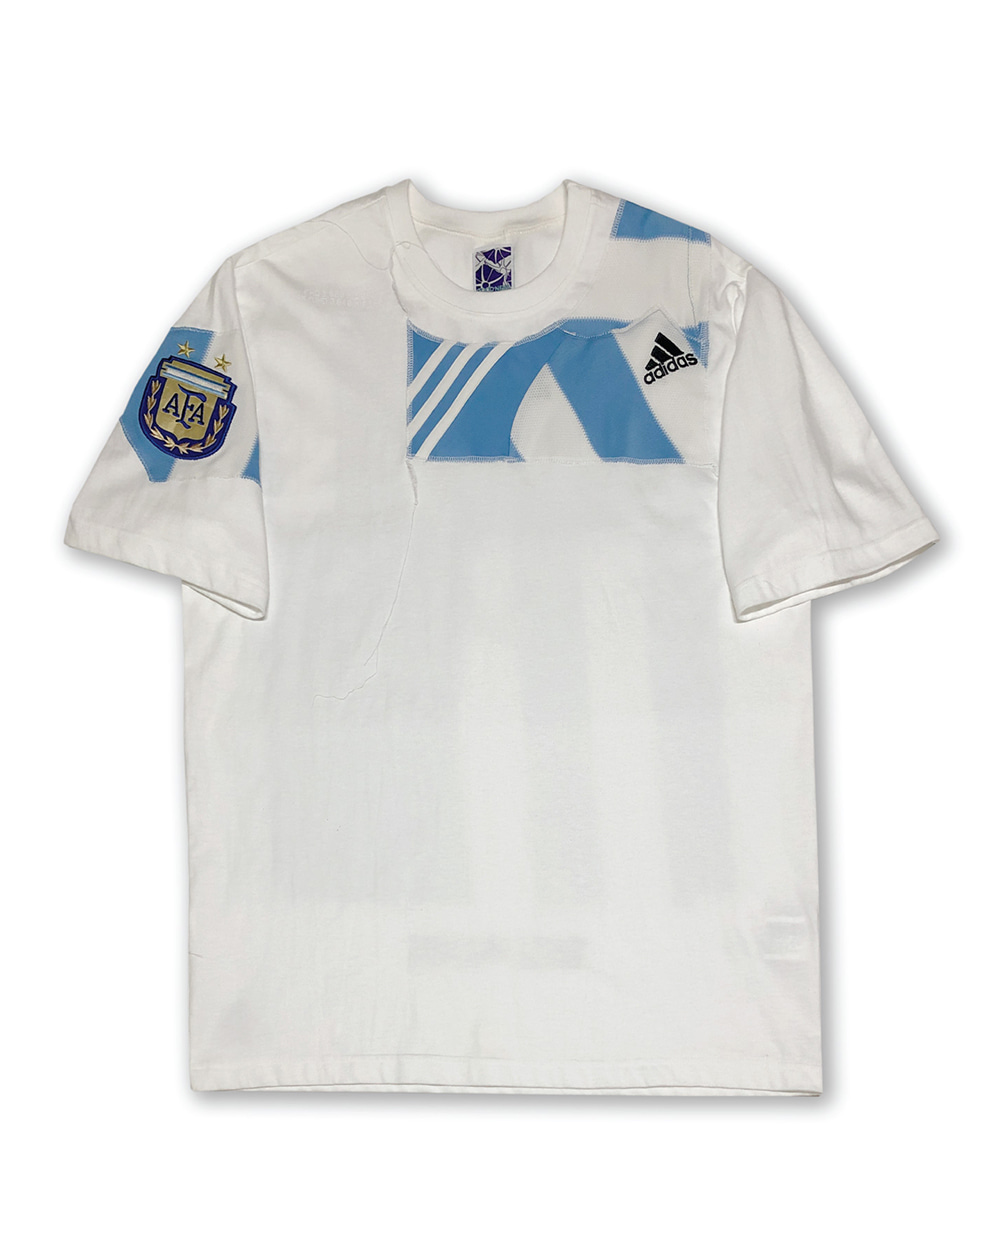 GOOD NEWS Soccer jersey patch T-shirts (White) ver.4